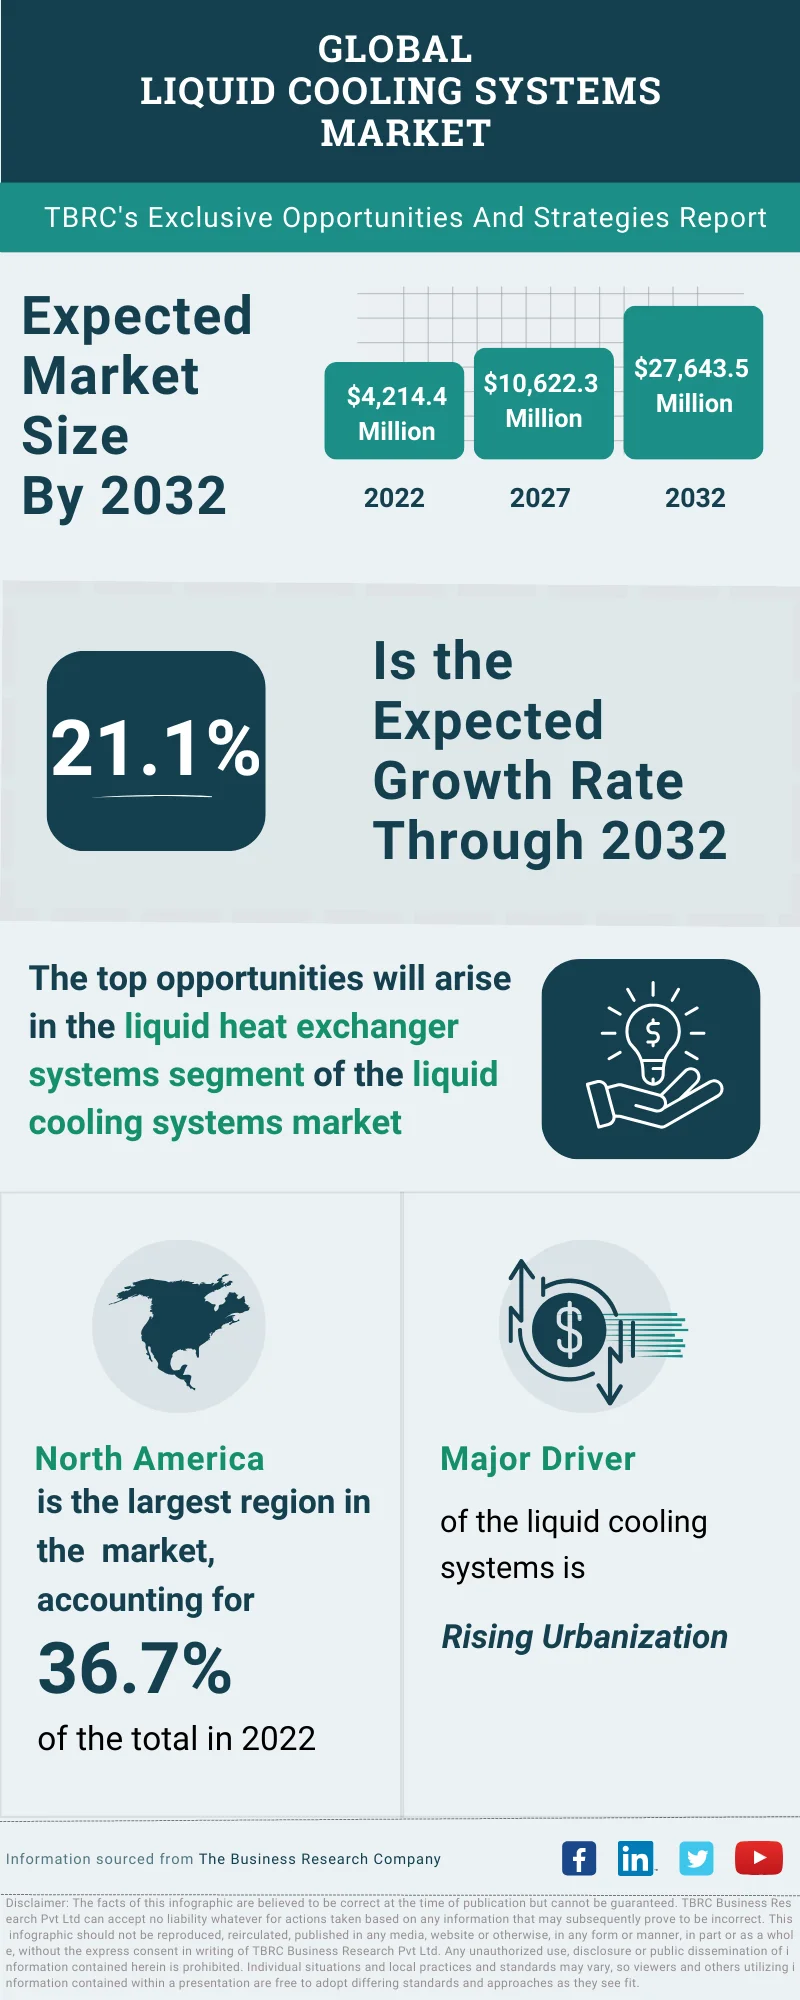 Liquid Cooling Systems Global Market Opportunities And Strategies To 2032